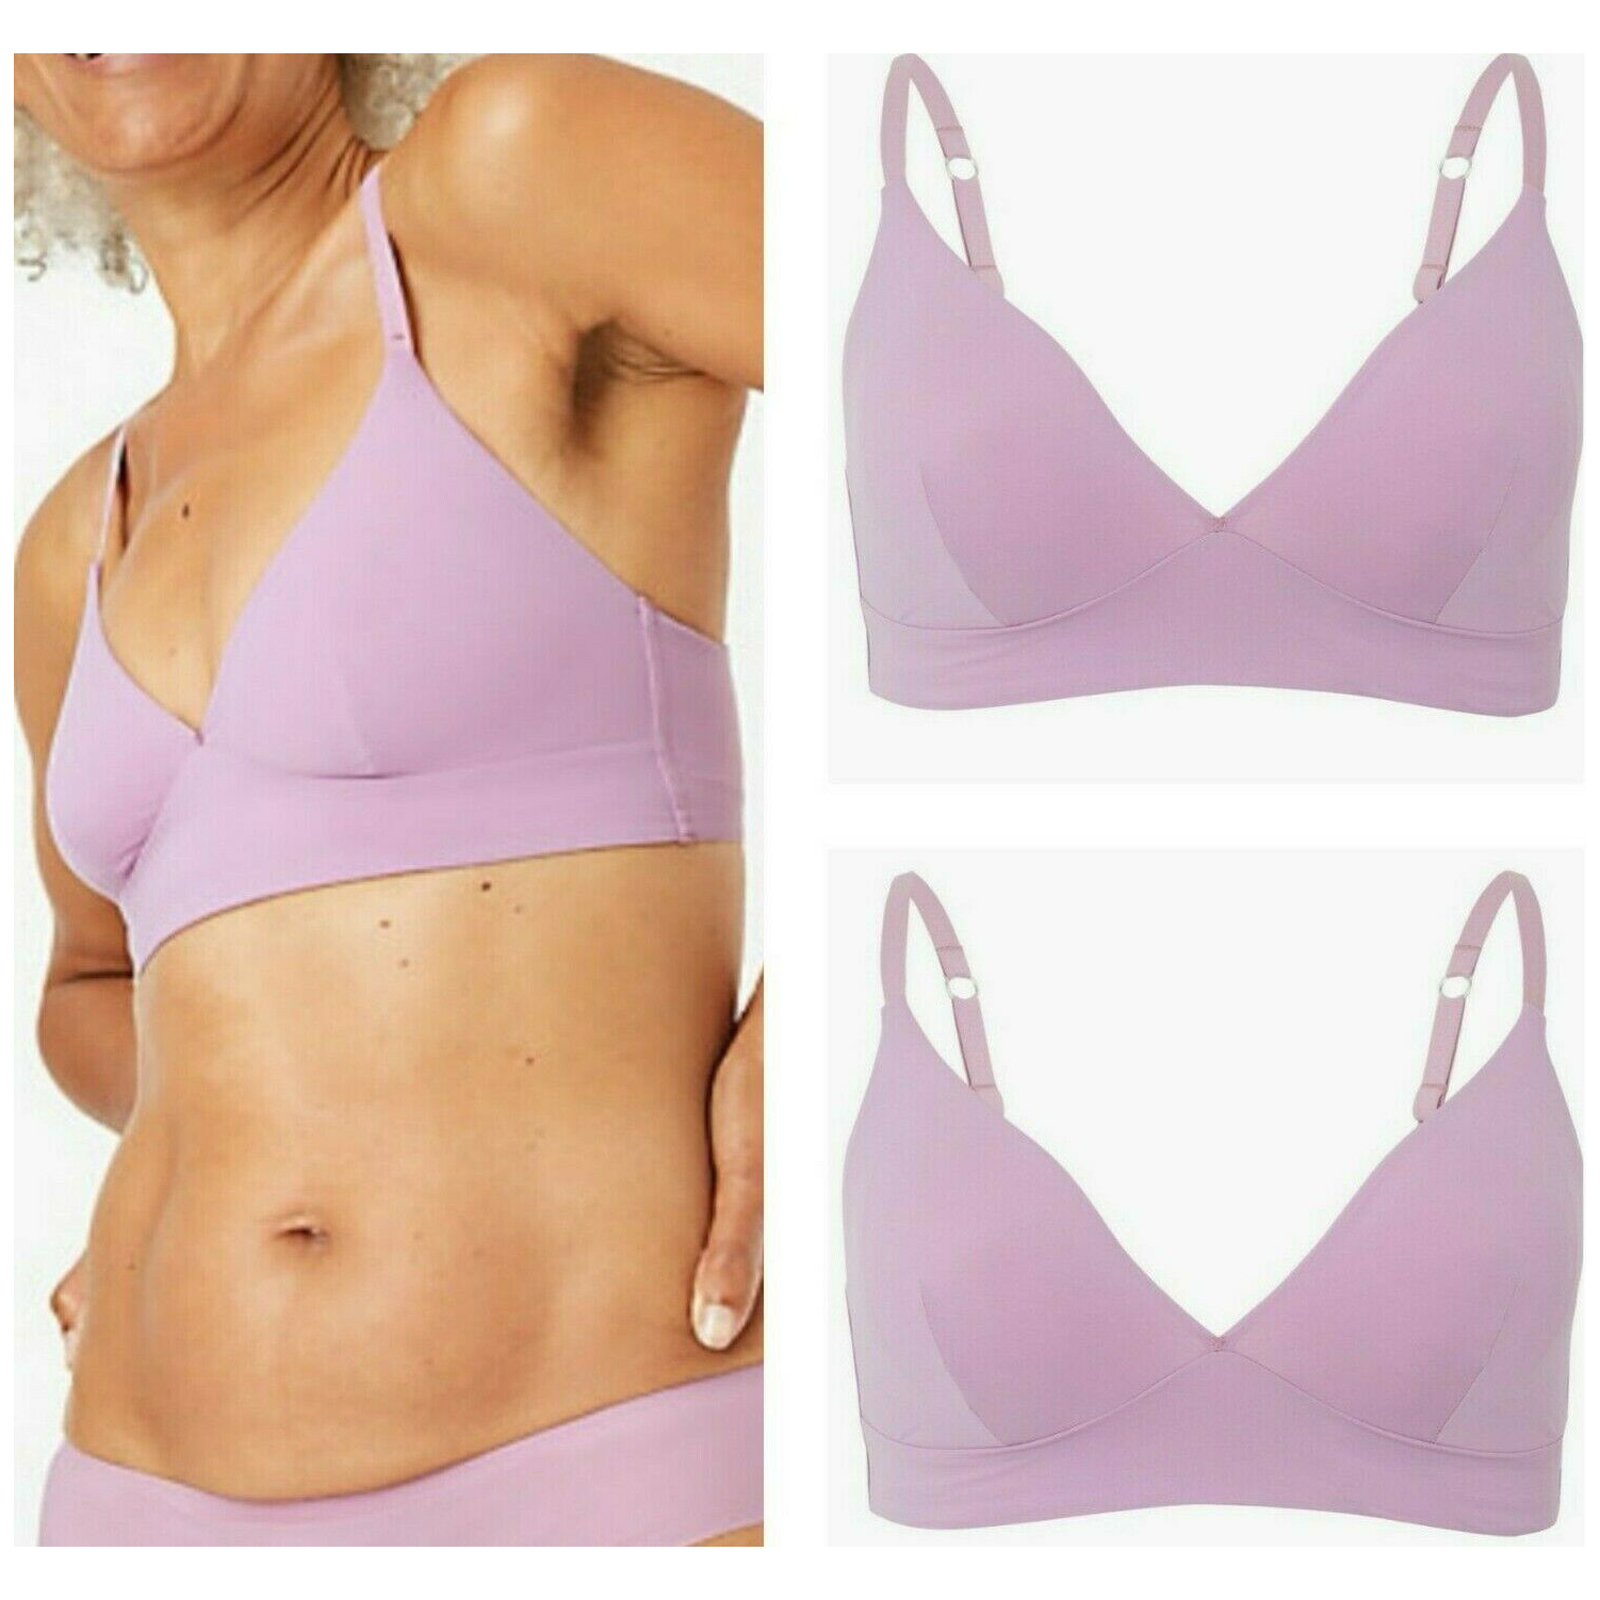 New Bralette Non Wired Soft Bra M S Body Smoothing Plunge Bra UK Size 32-38  A-E